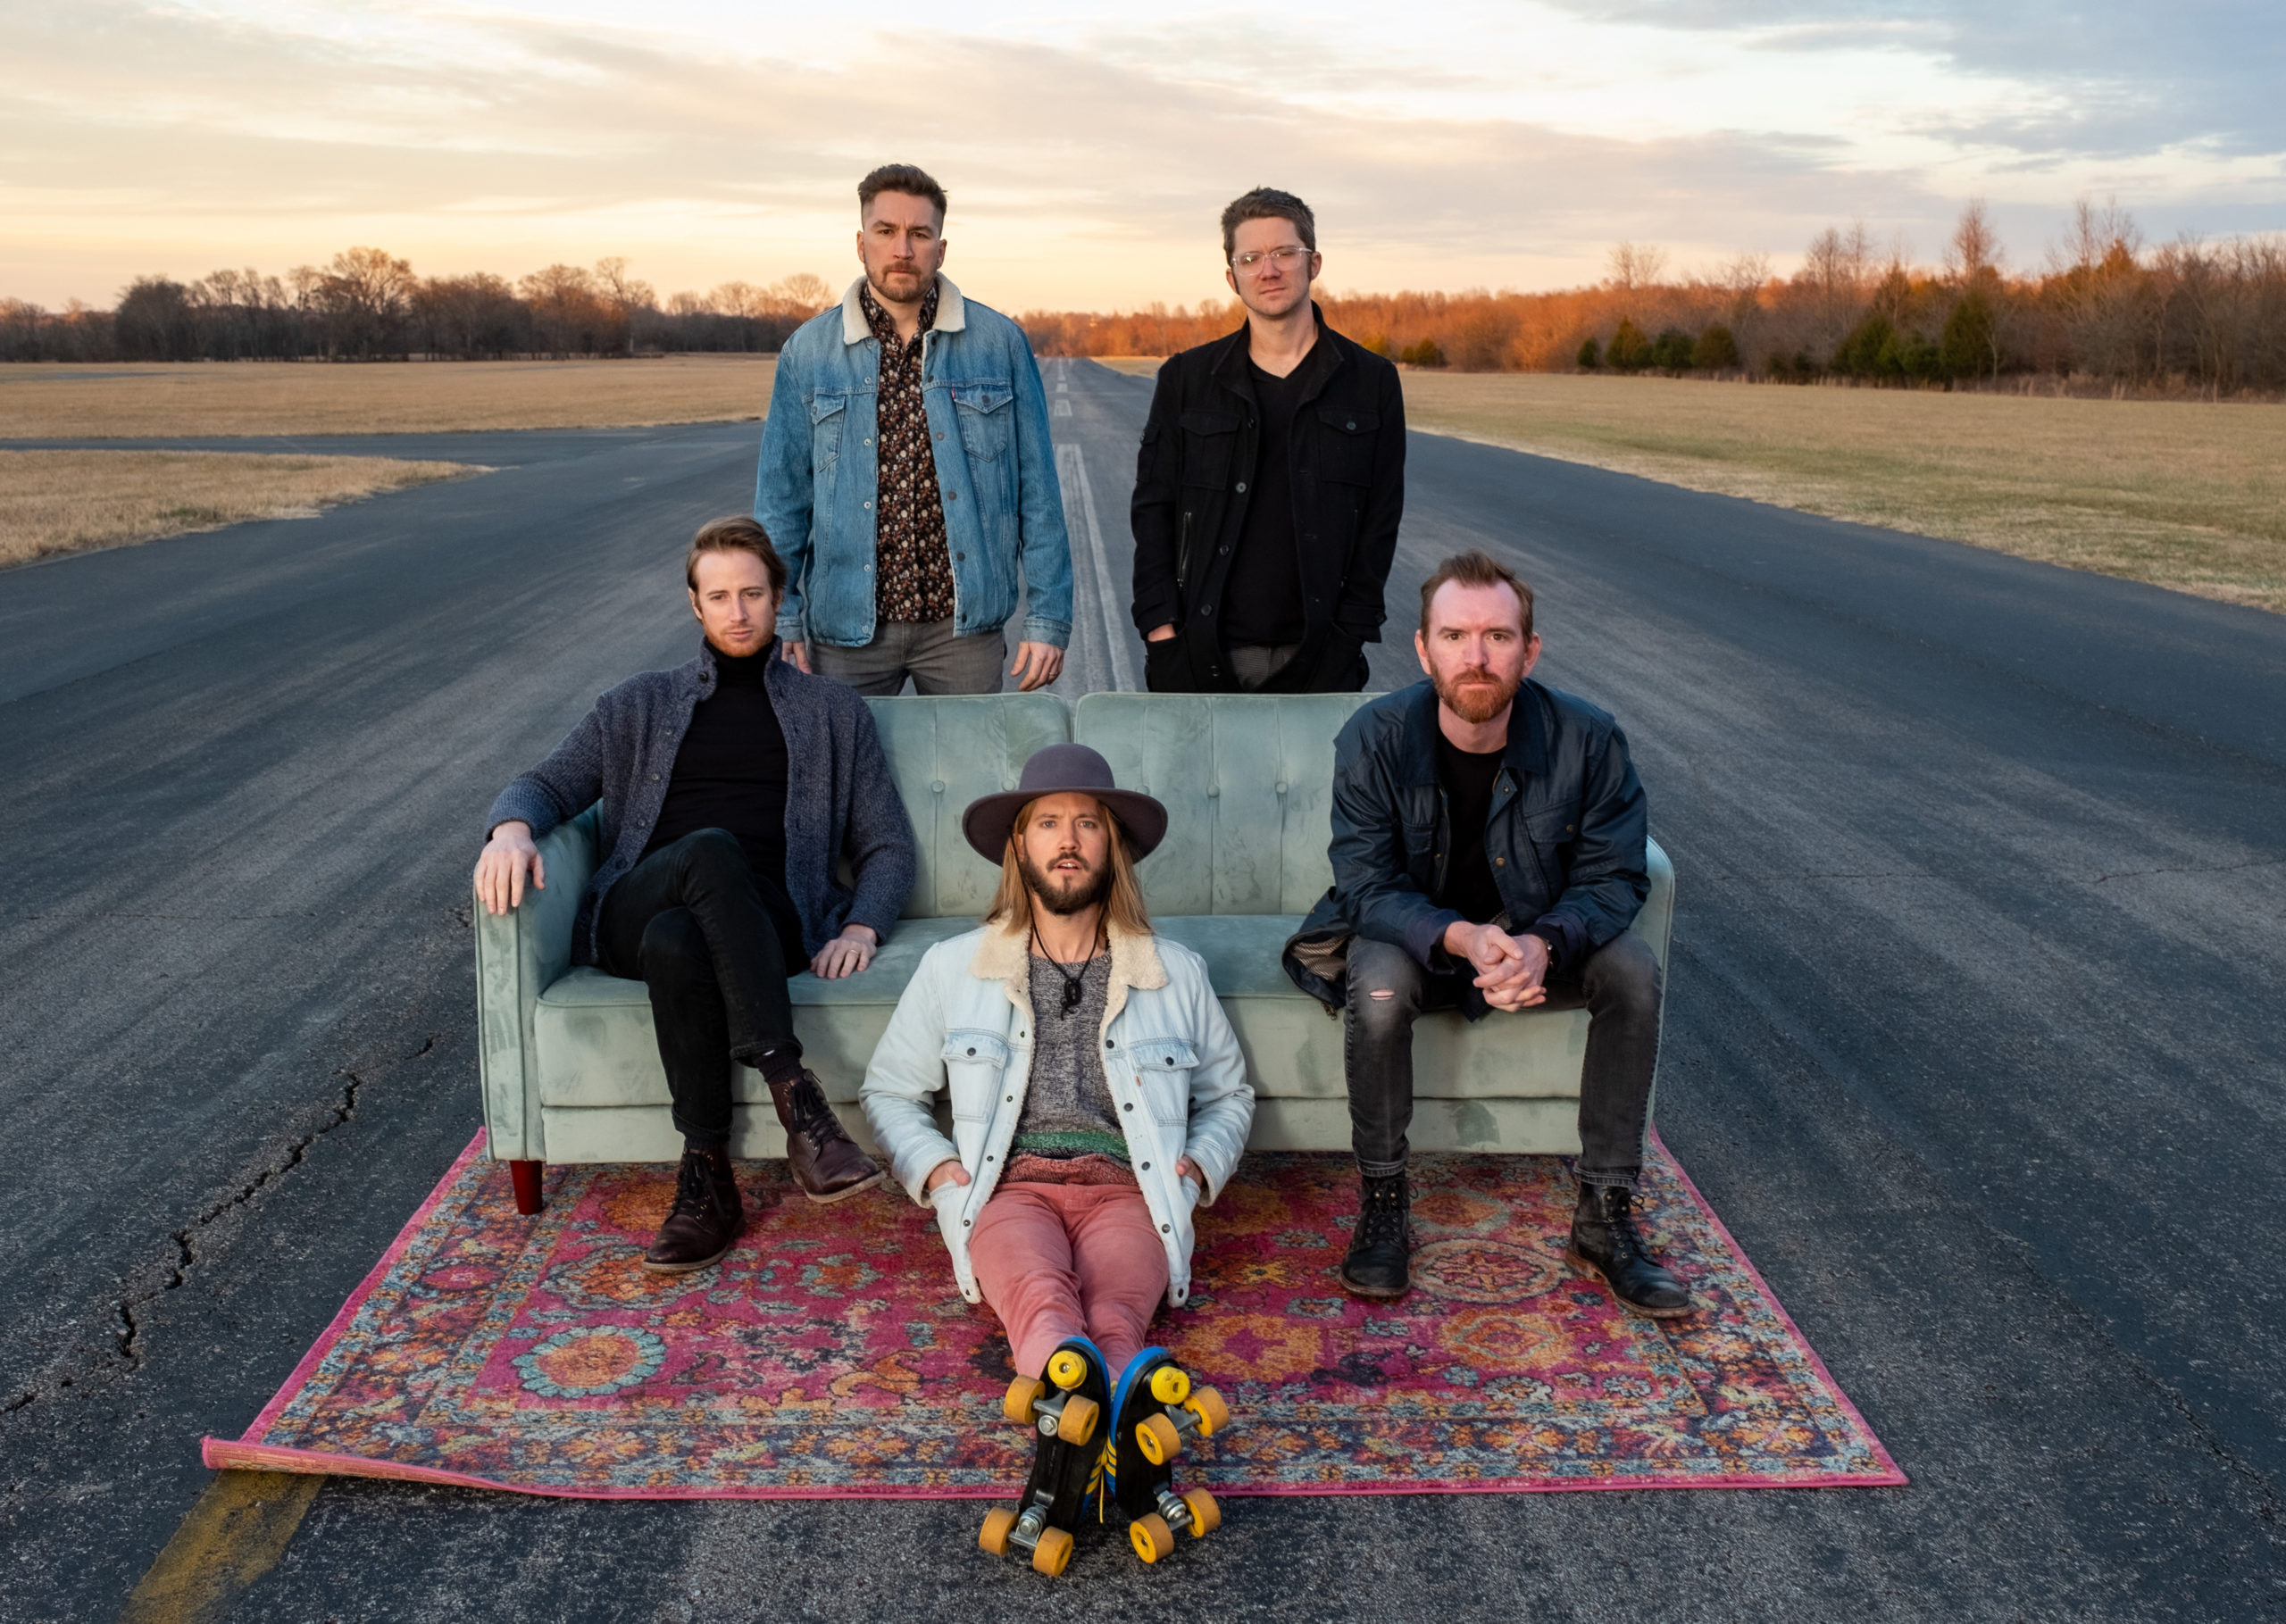 Video Premiere: Moon Taxi Releases “Mission” on Eve of ‘Silver Dream’ Tour